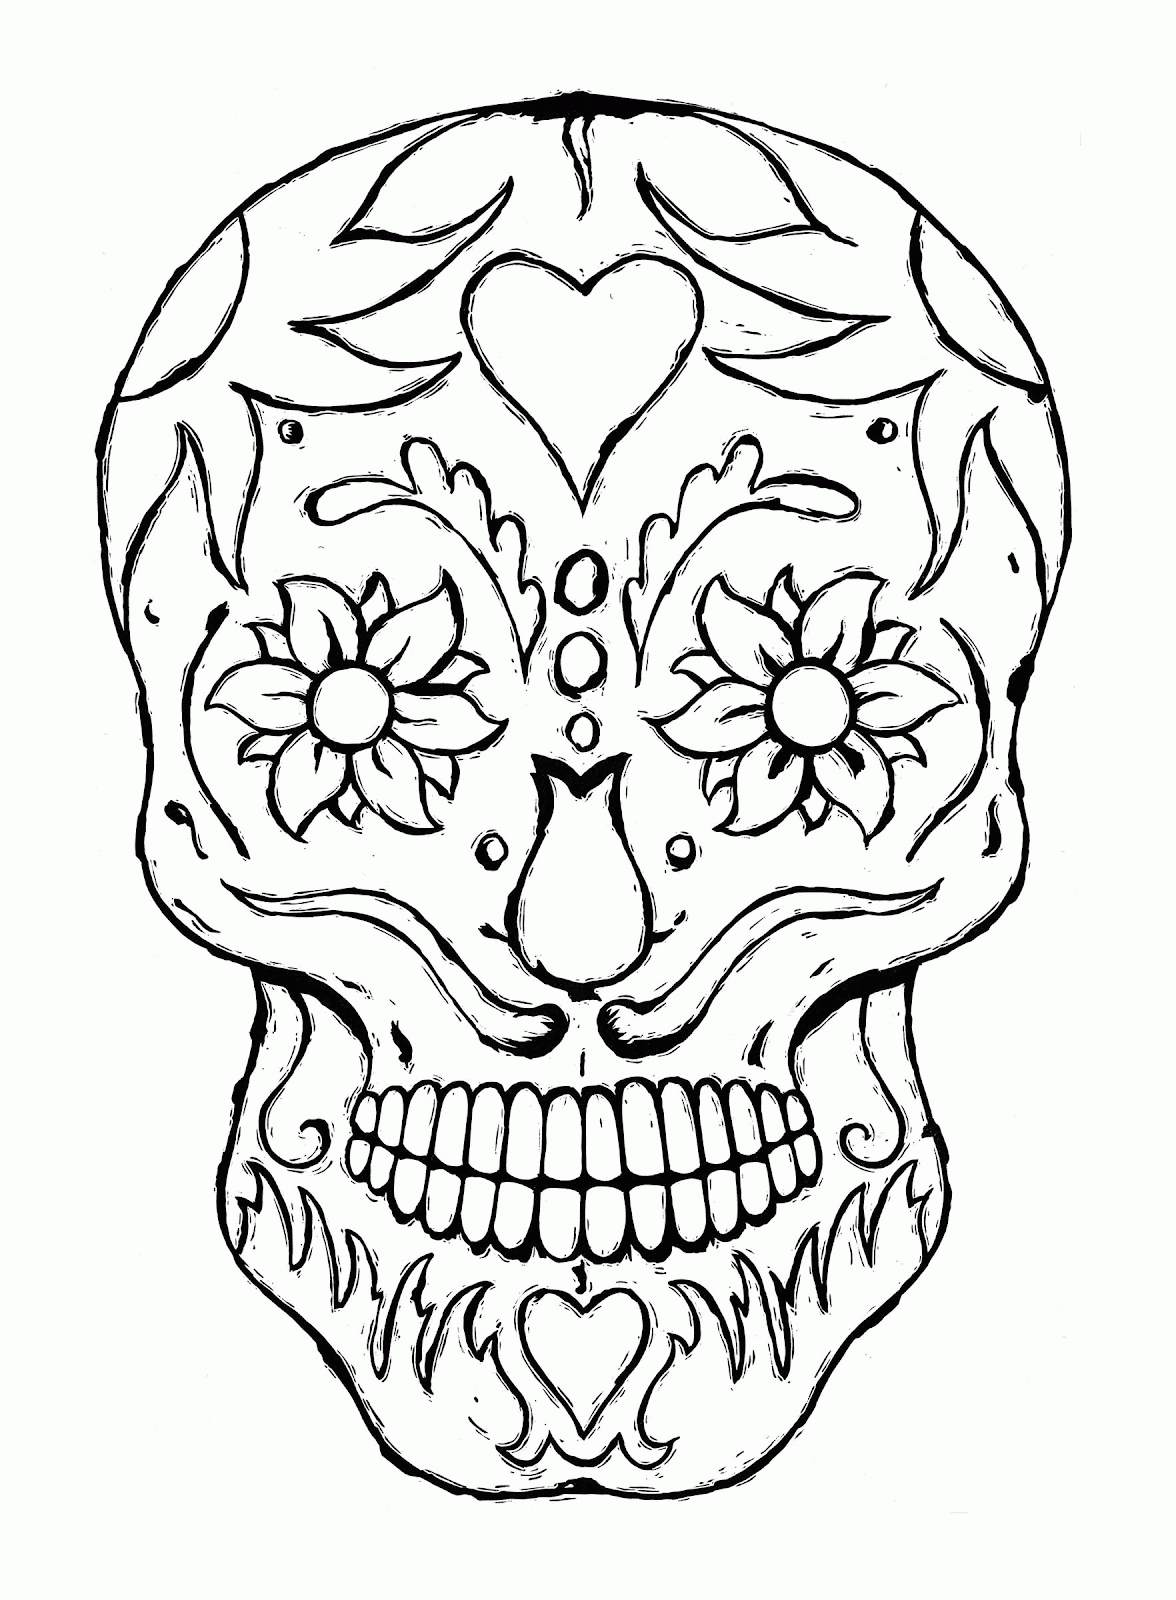 Day of The Dead Skull Coloring Pages - Bestofcoloring.com